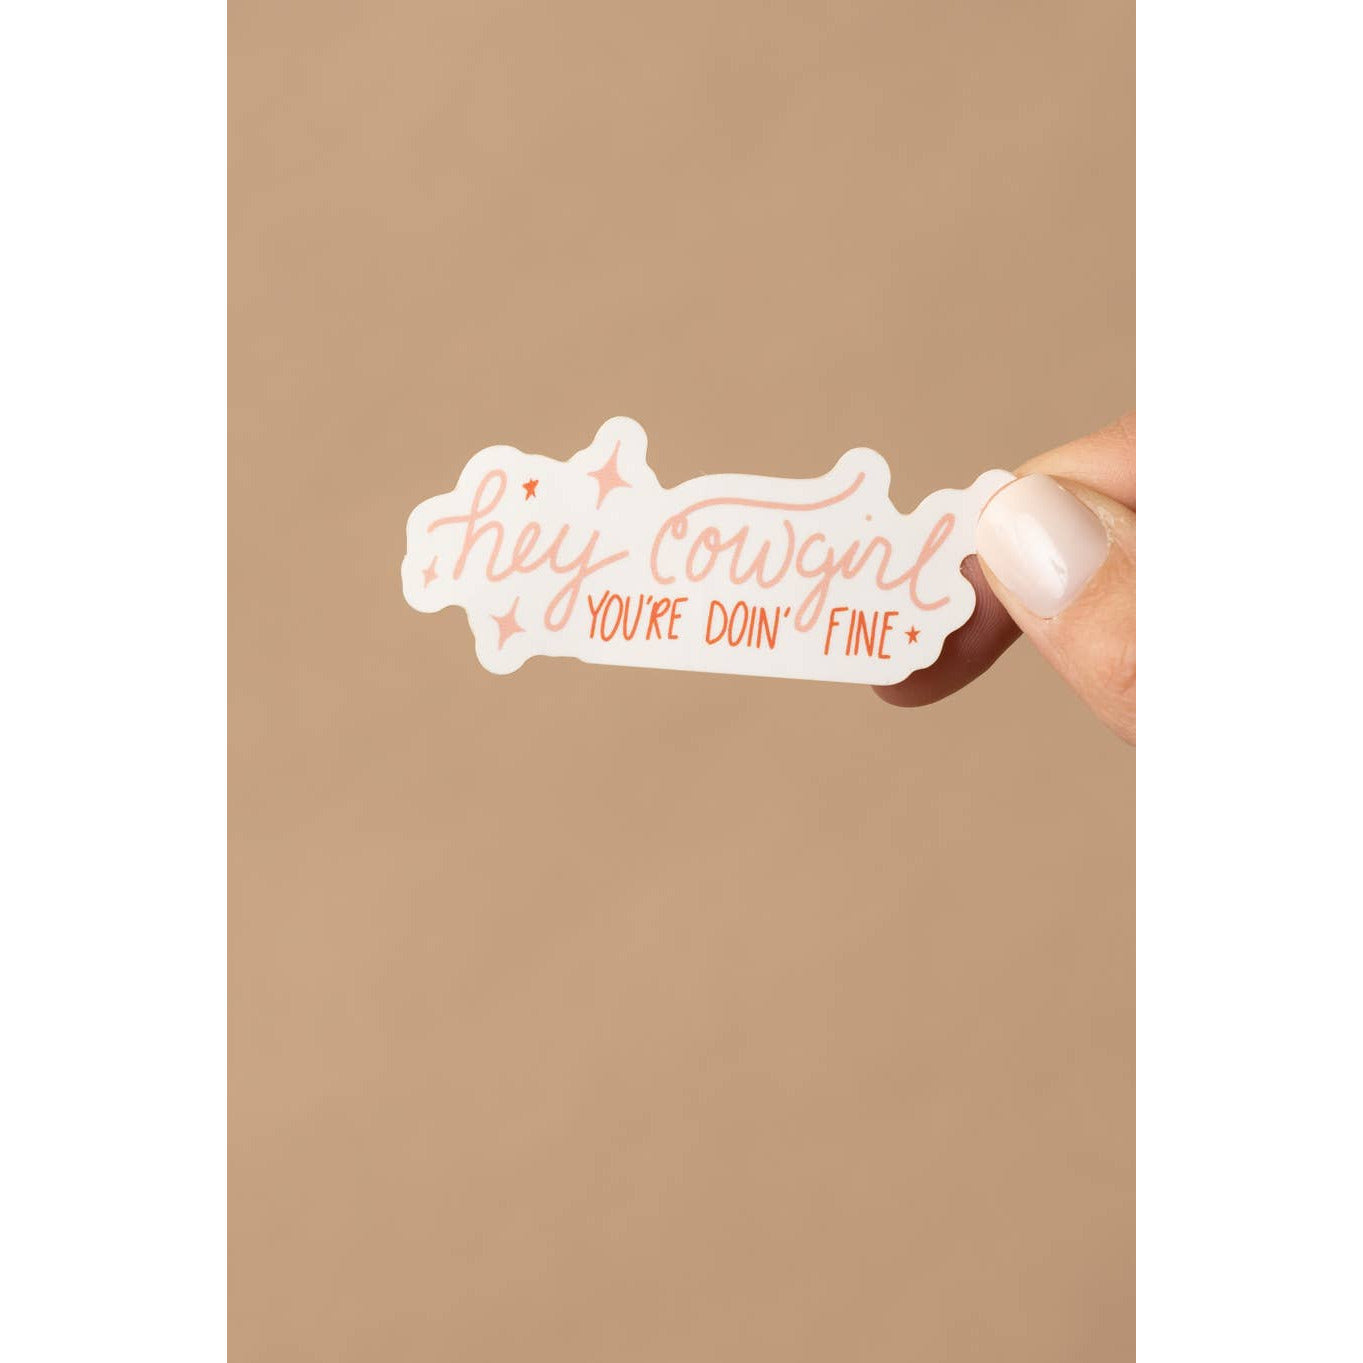 "Hey Cowgirl, You're Doin' Fine" Decal Sticker